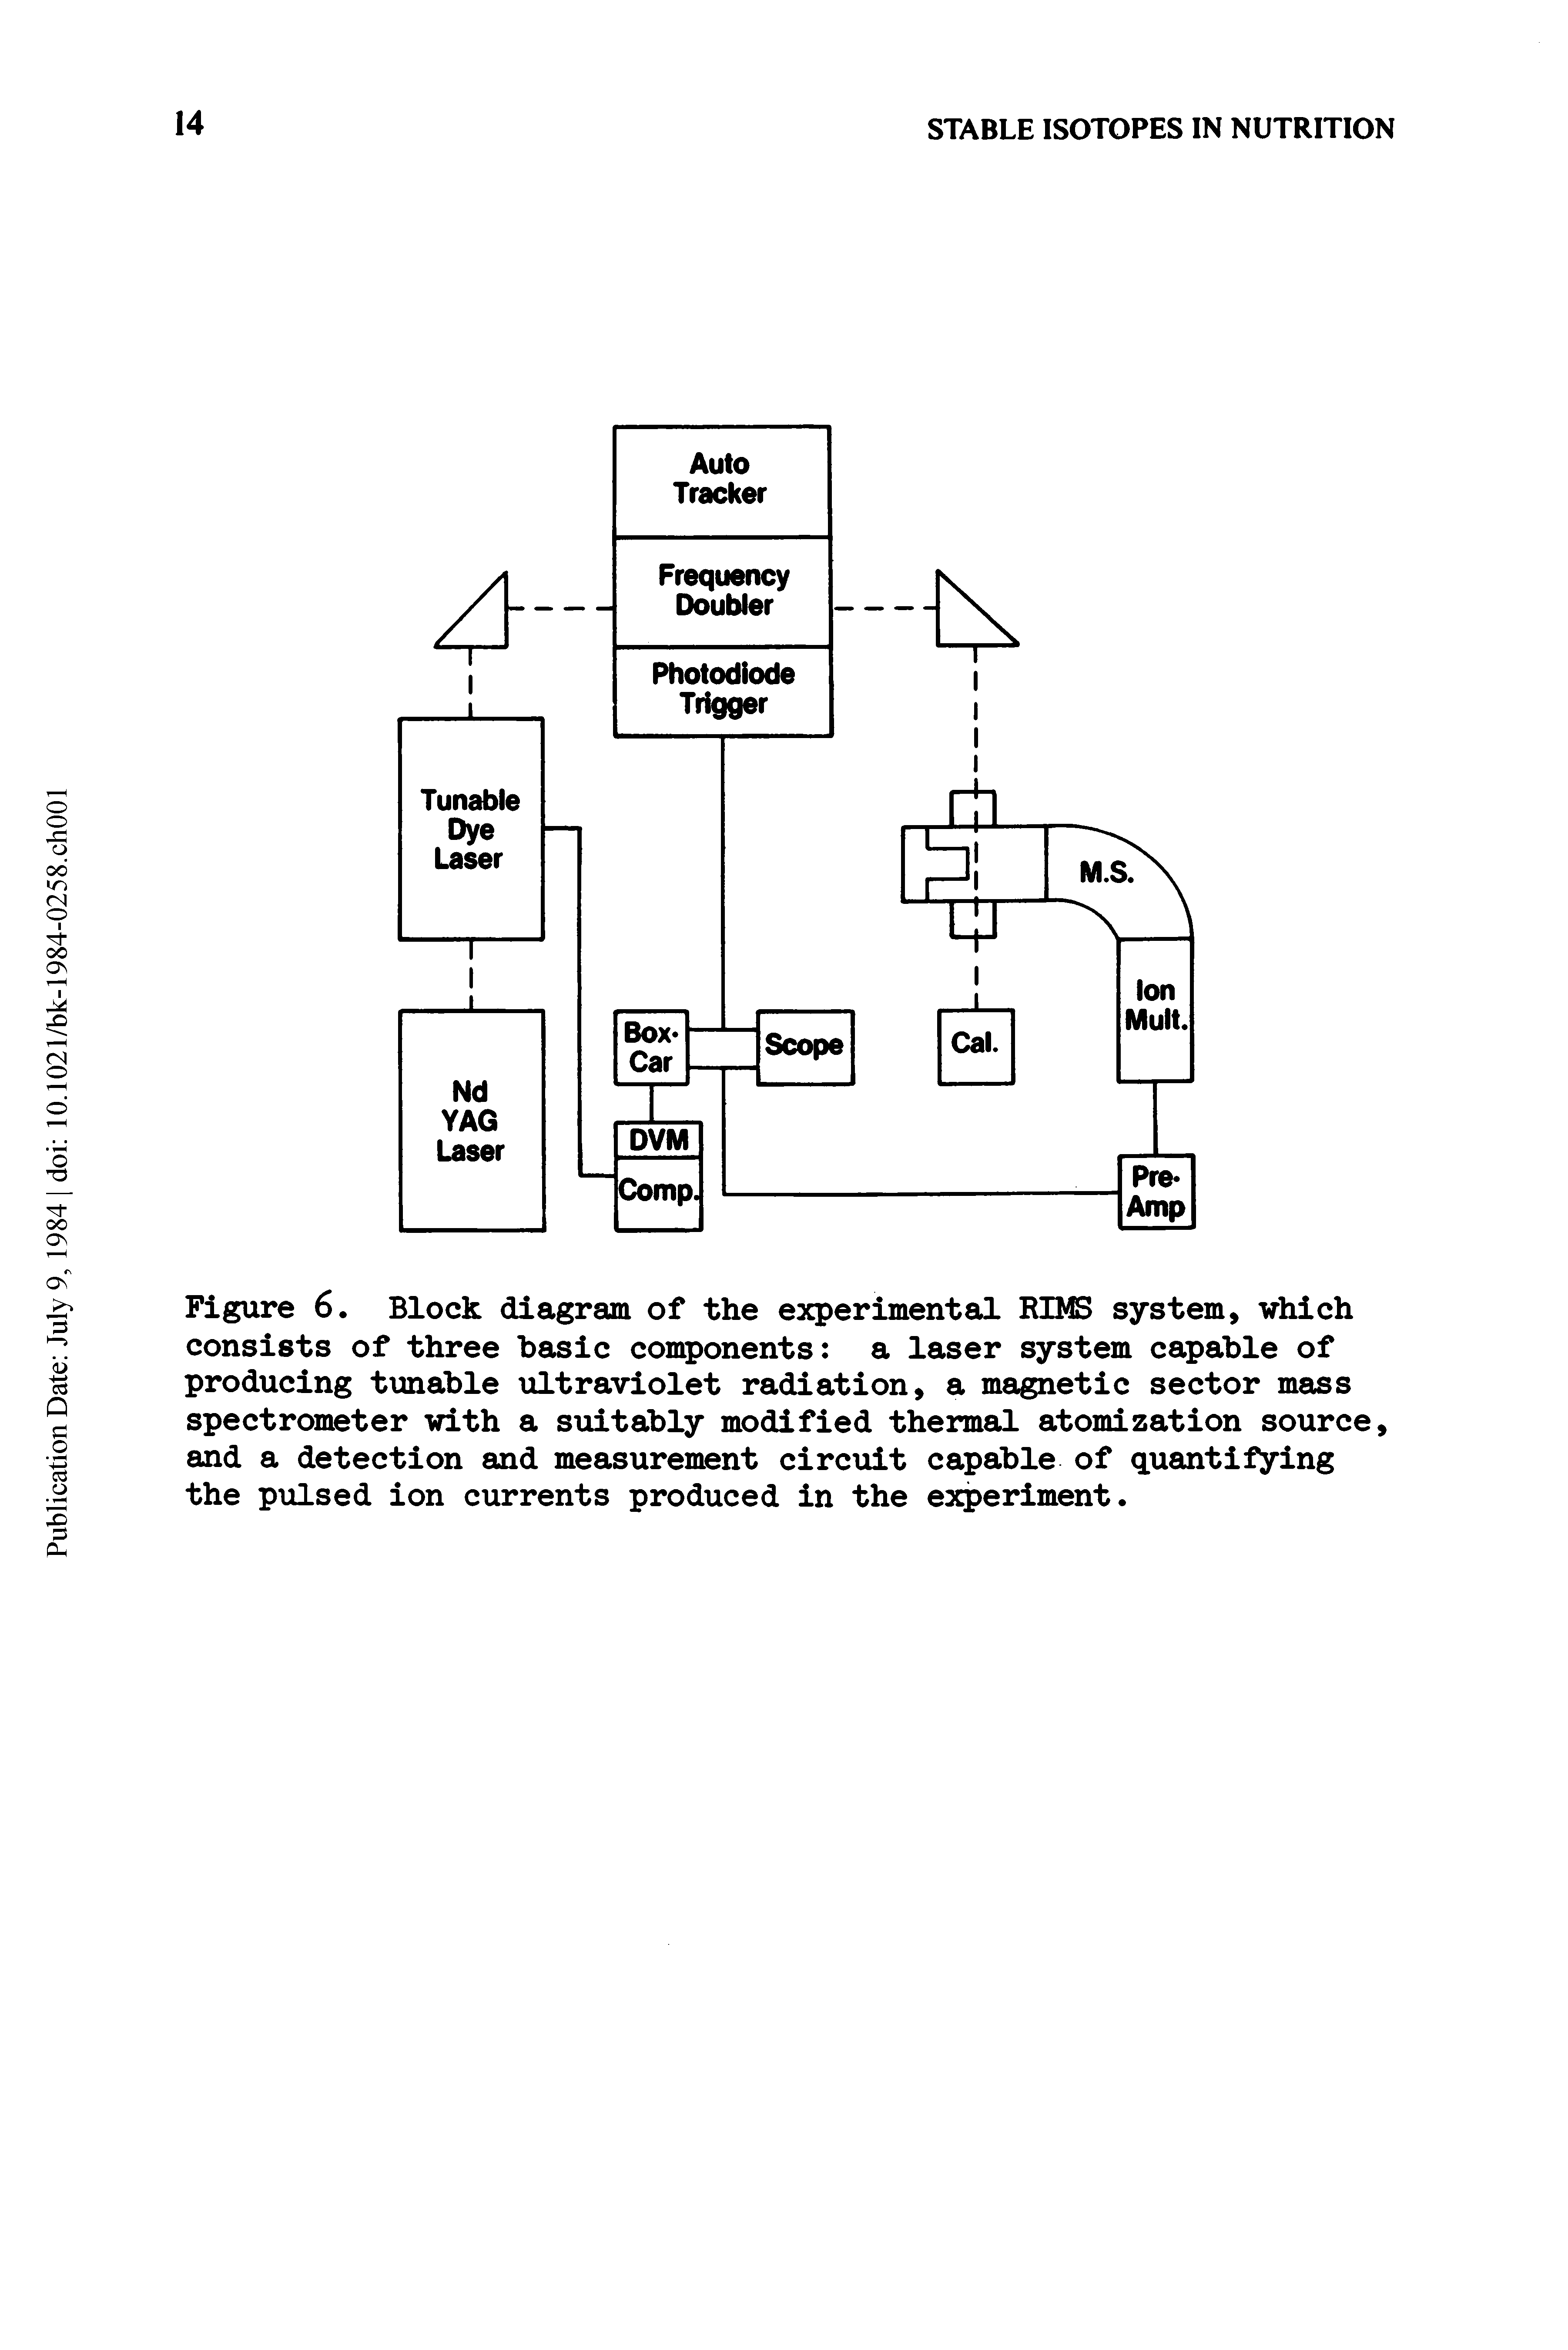 Figure 6. Block diagram of the experimental. RB system, vhich consists of three basic components a laser system capable of producing tunable ultraviolet radiation, a magnetic sector mass spectrometer with a suitably modified thermal atomization source, and a detection and measurement circuit capable of quantifying the pulsed ion currents produced in the experiment.